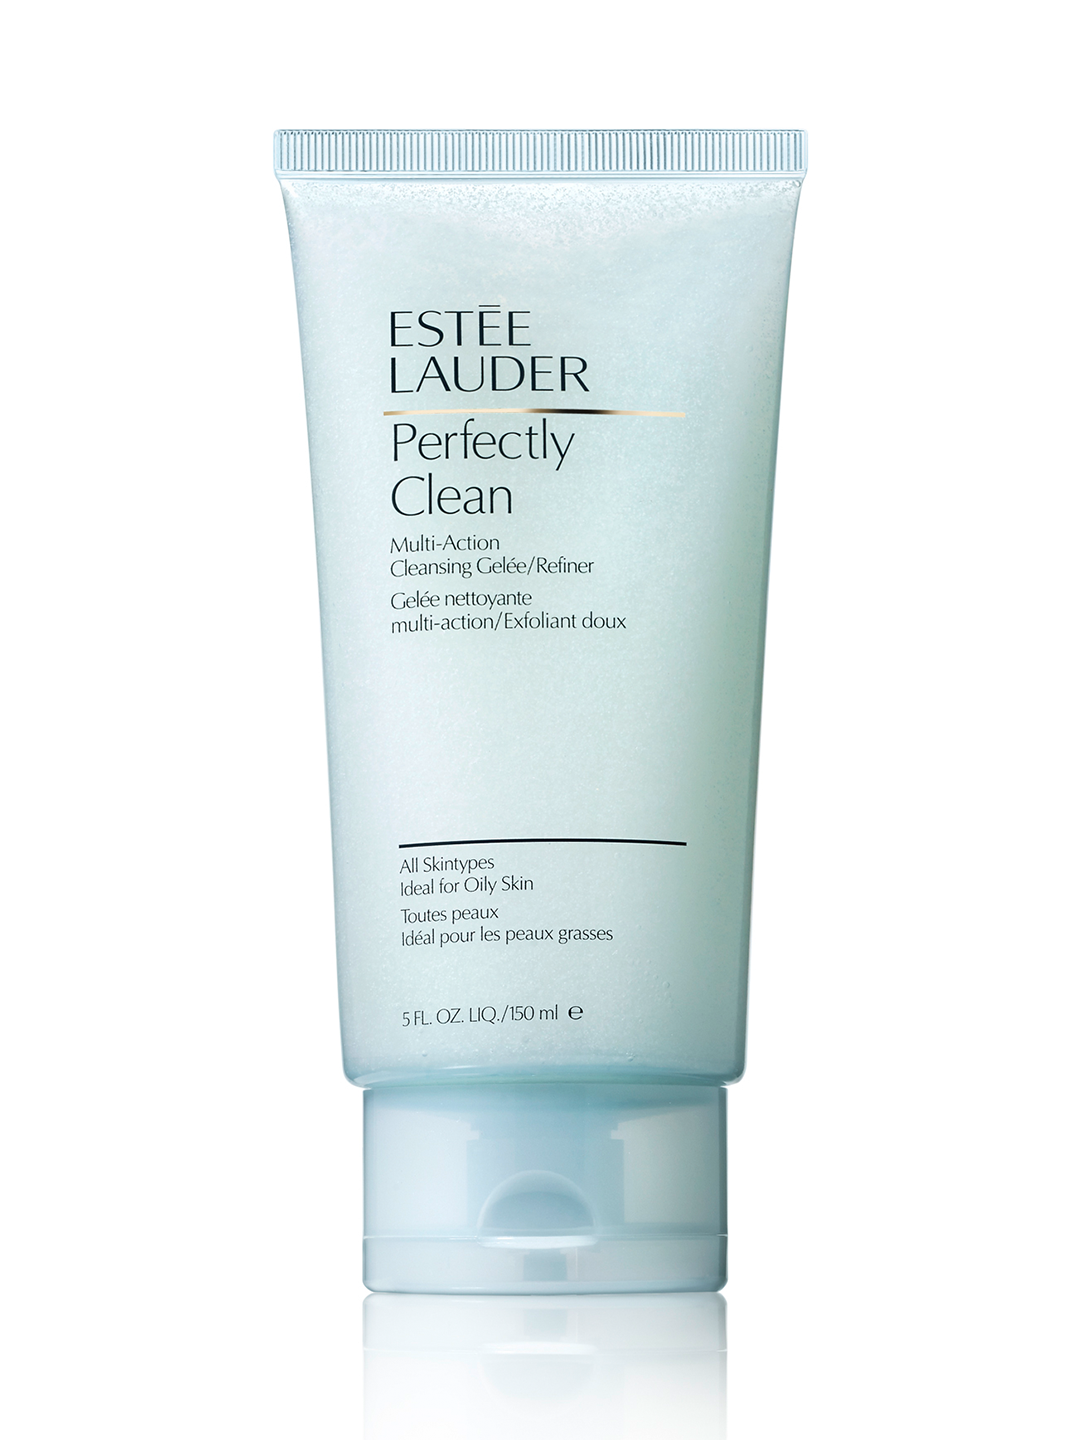 Perfectly Clean Multi-Action Cleansing Gelee/Refiner - MazenOnline